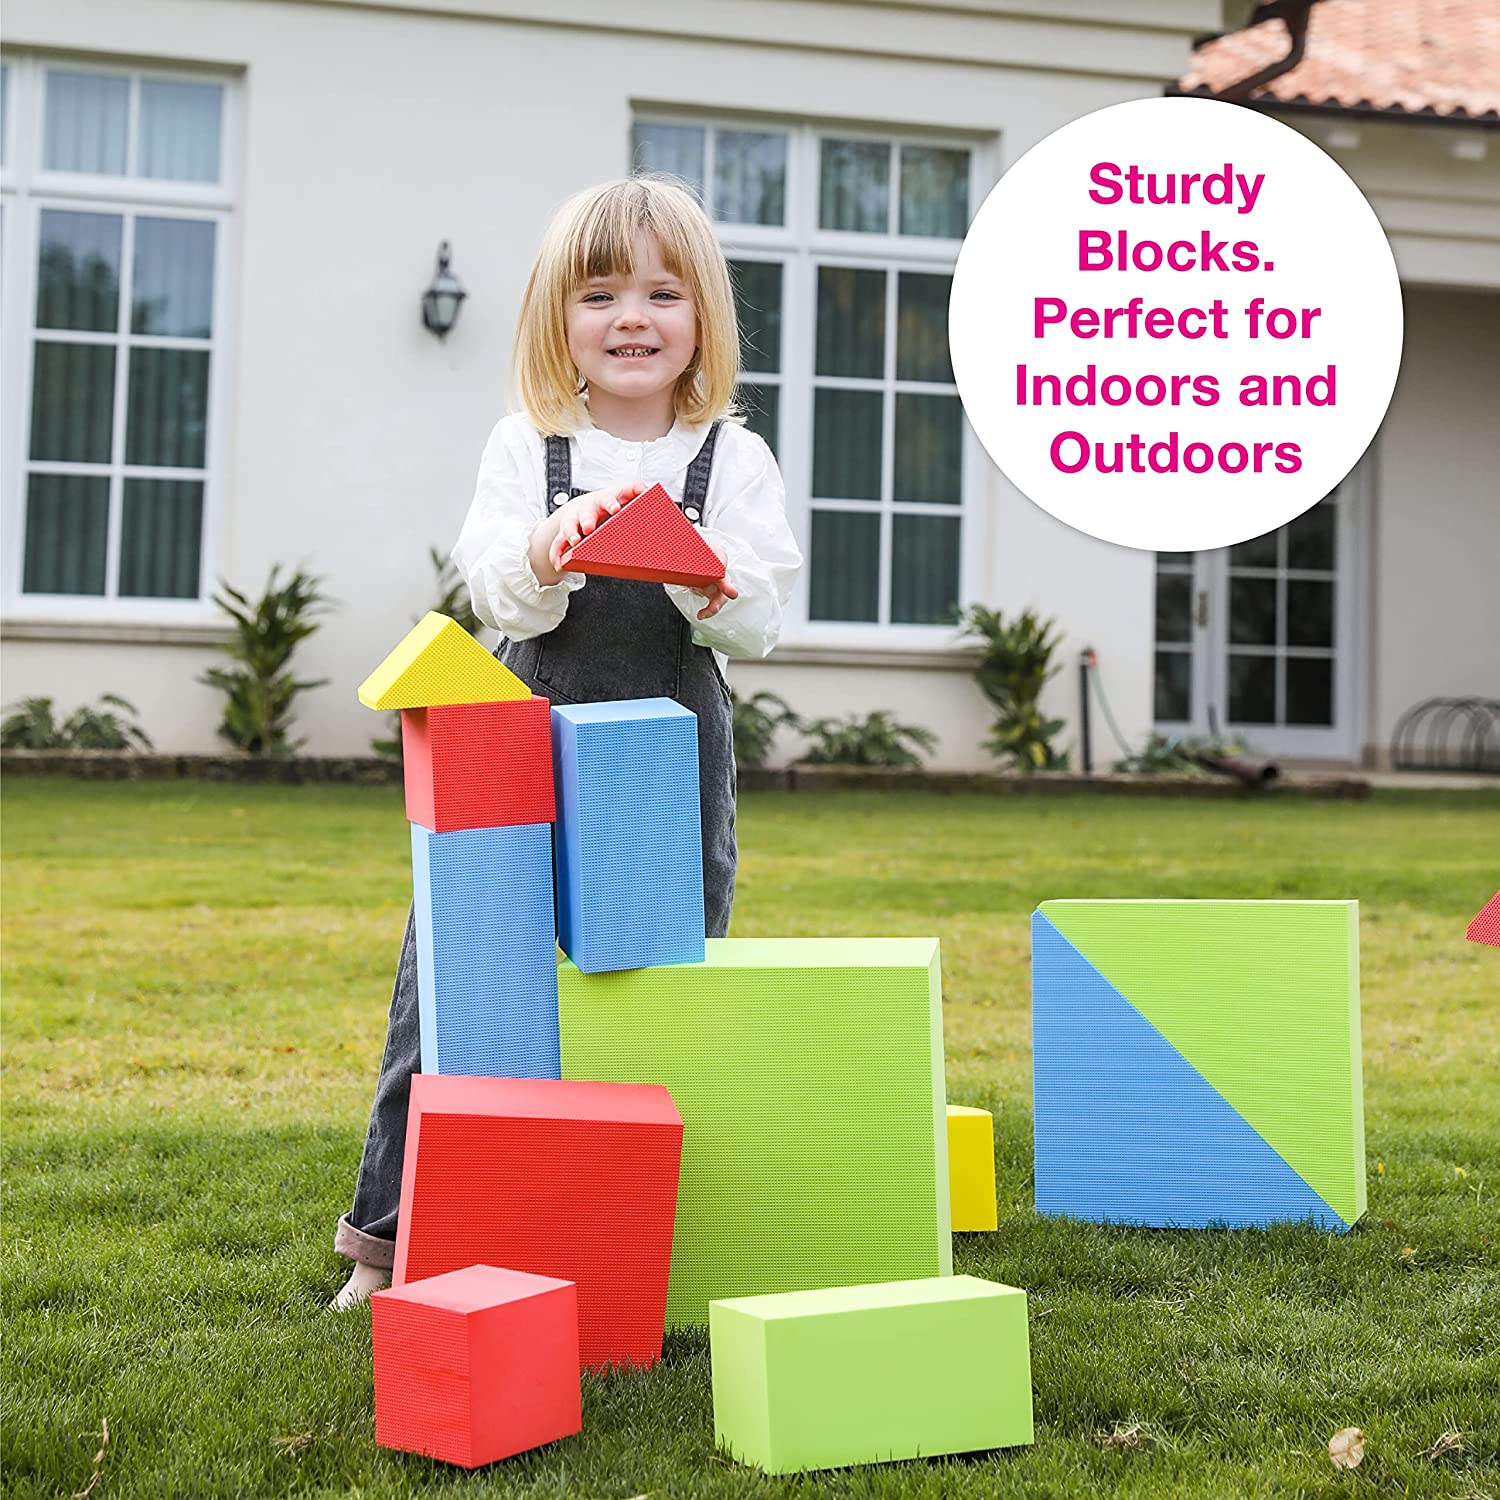 Edushape Giant Soft Baby Blocks, 32 Pieces - Vibrant Multi-Colored Stacking Blocks for Building &amp; Learning - Educational Play Soft Blocks for Babies 6-12 Months, Toddlers, &amp; Kids